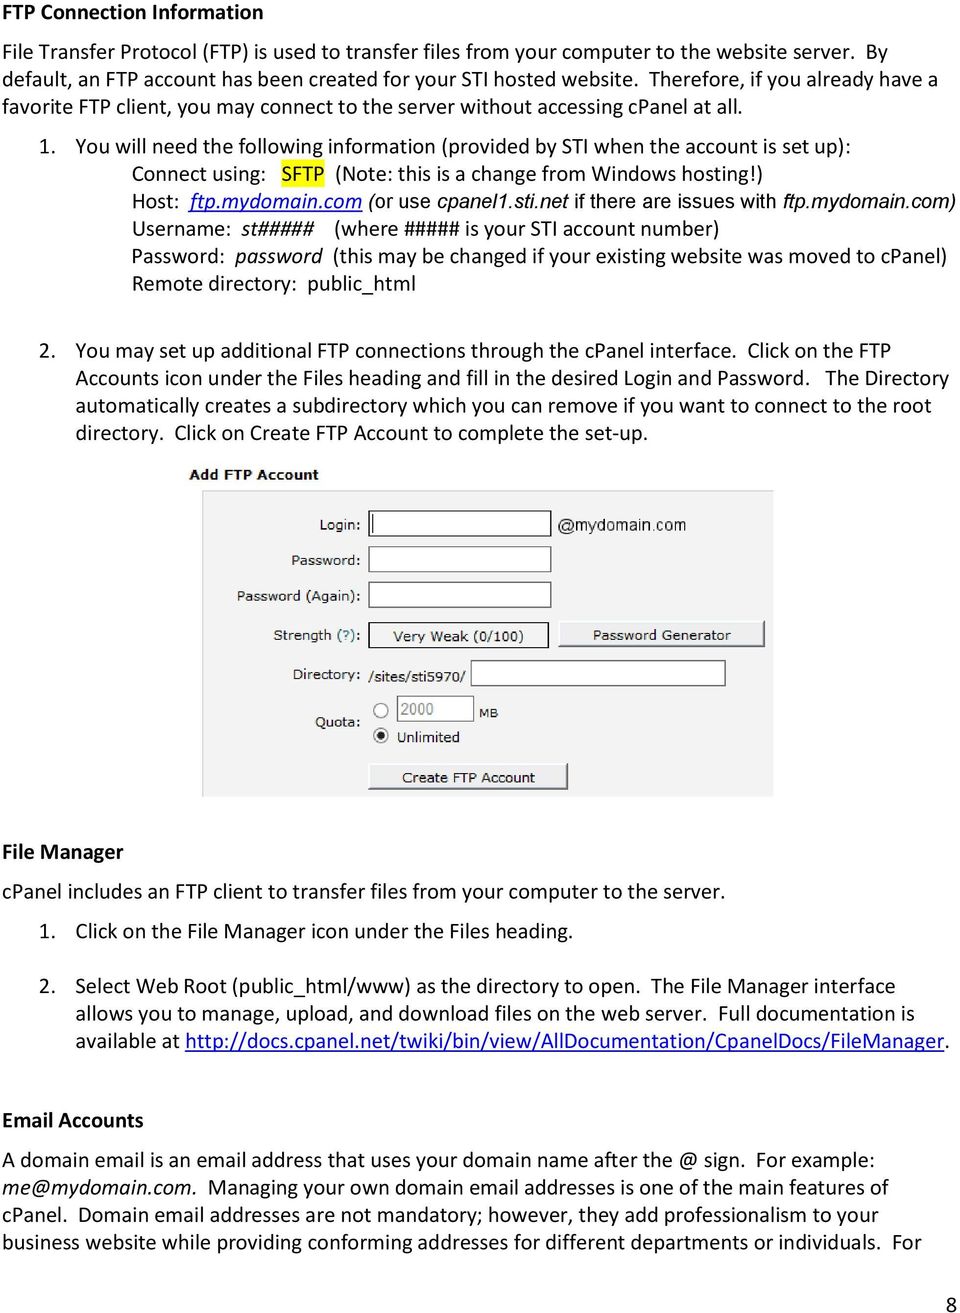 You will need the following information (provided by STI when the account is set up): Connect using: SFTP (Note: this is a change from Windows hosting!) Host: ftp.mydomain.com (or use cpanel1.sti.net if there are issues with ftp.